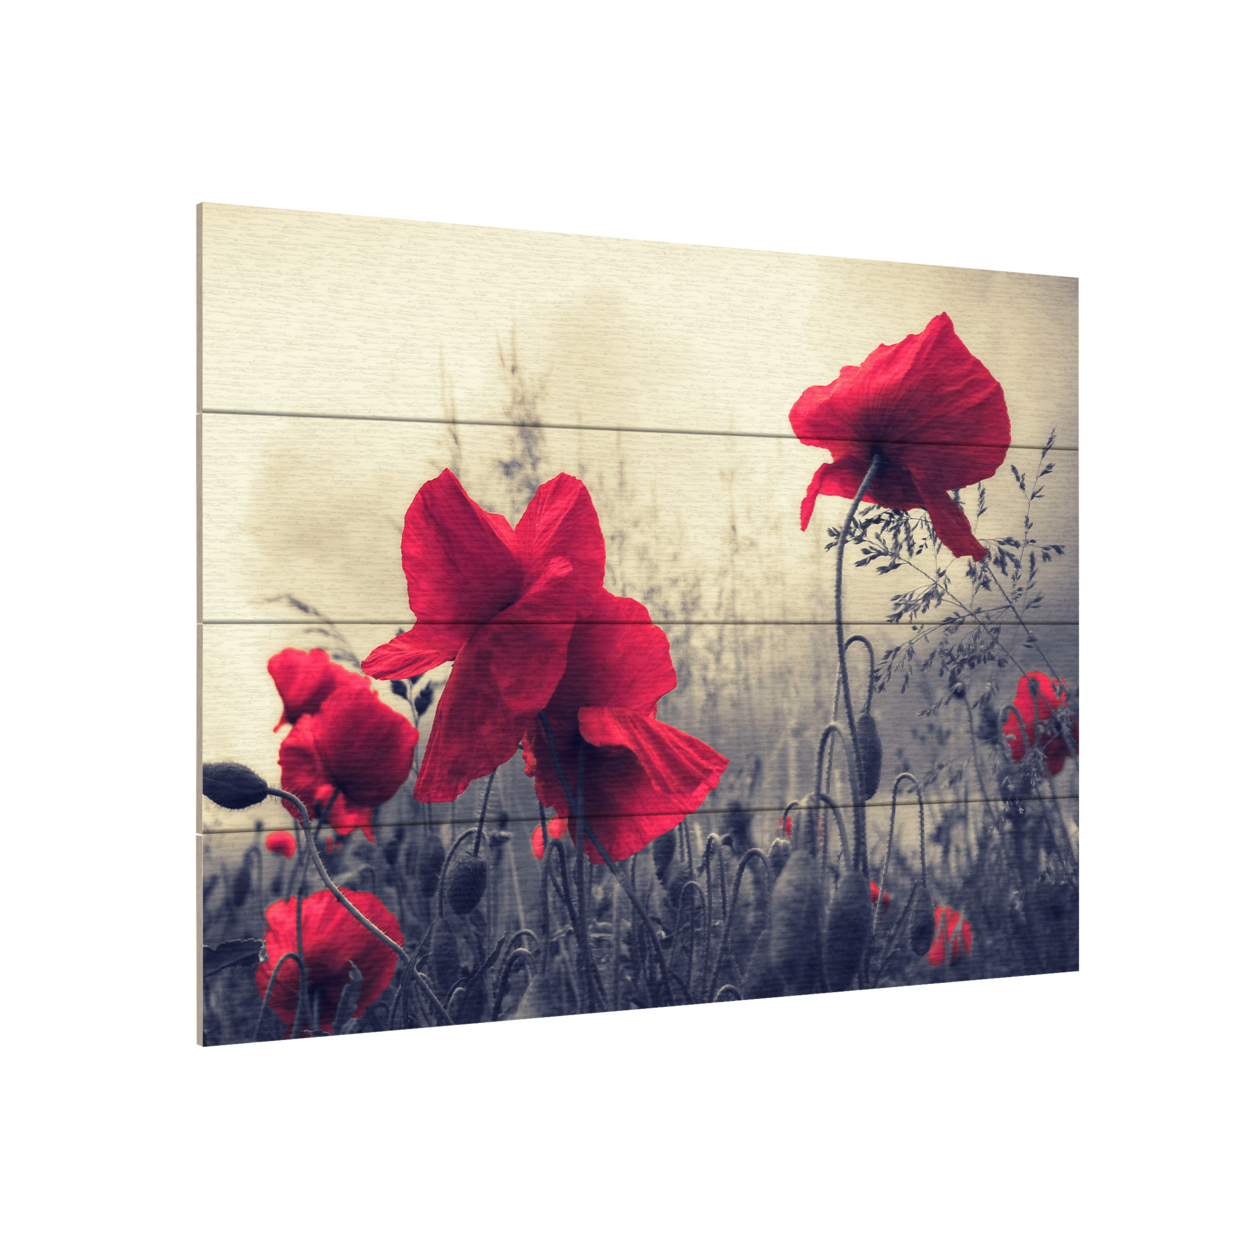 Wall Art 12 X 16 Inches Titled Red For Love Ready To Hang Printed On Wooden Planks